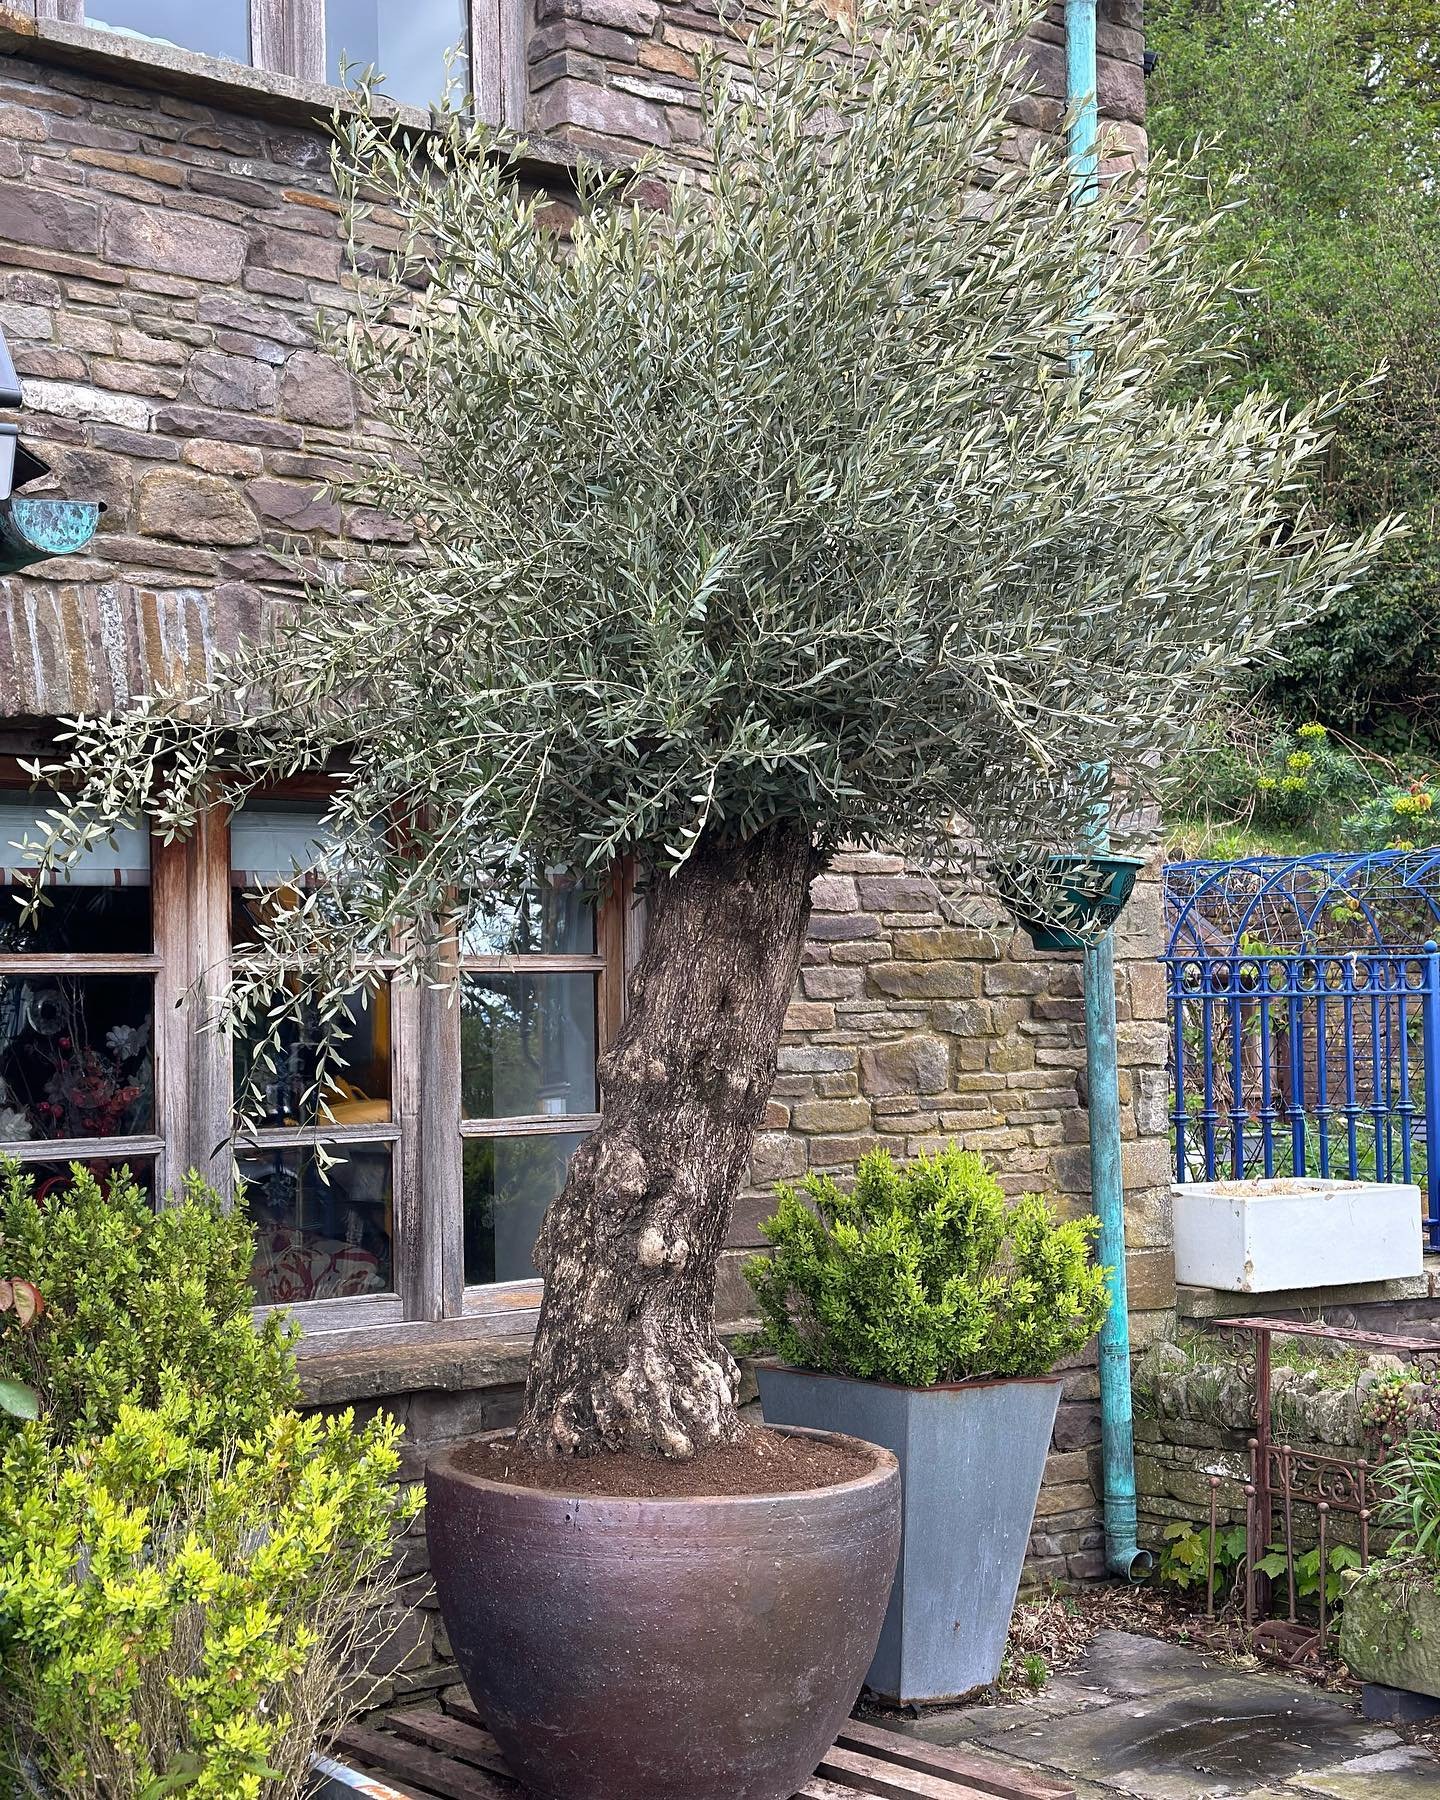 2 x Huge olives delivered and repotted on site by Liam and Gavin today 👏 🫒 🌳